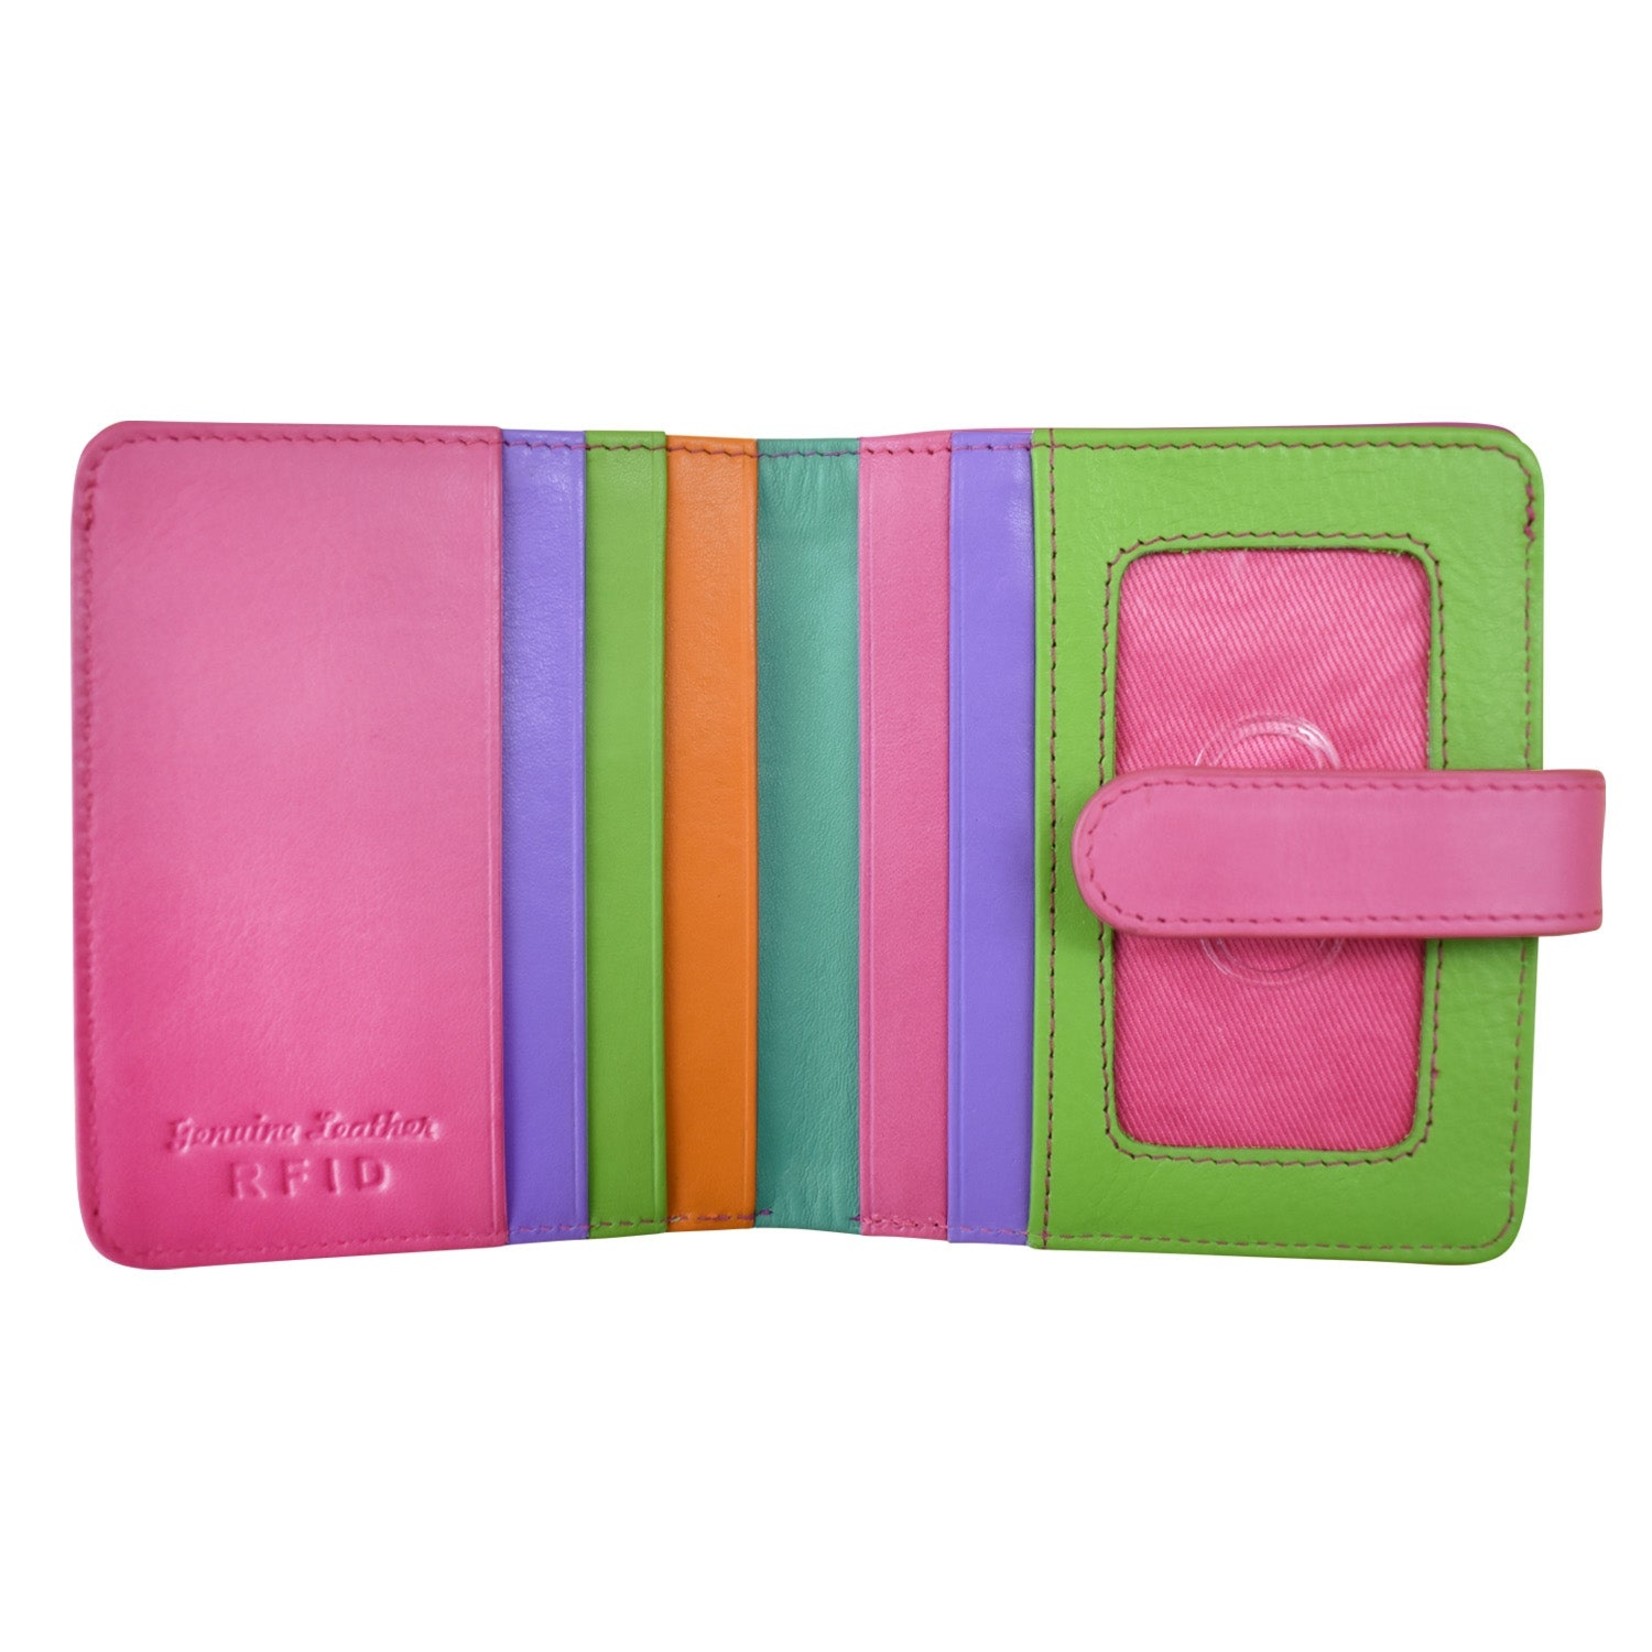 Leather Handbags and Accessories 7301 Palm Beach - RFID Small Wallet